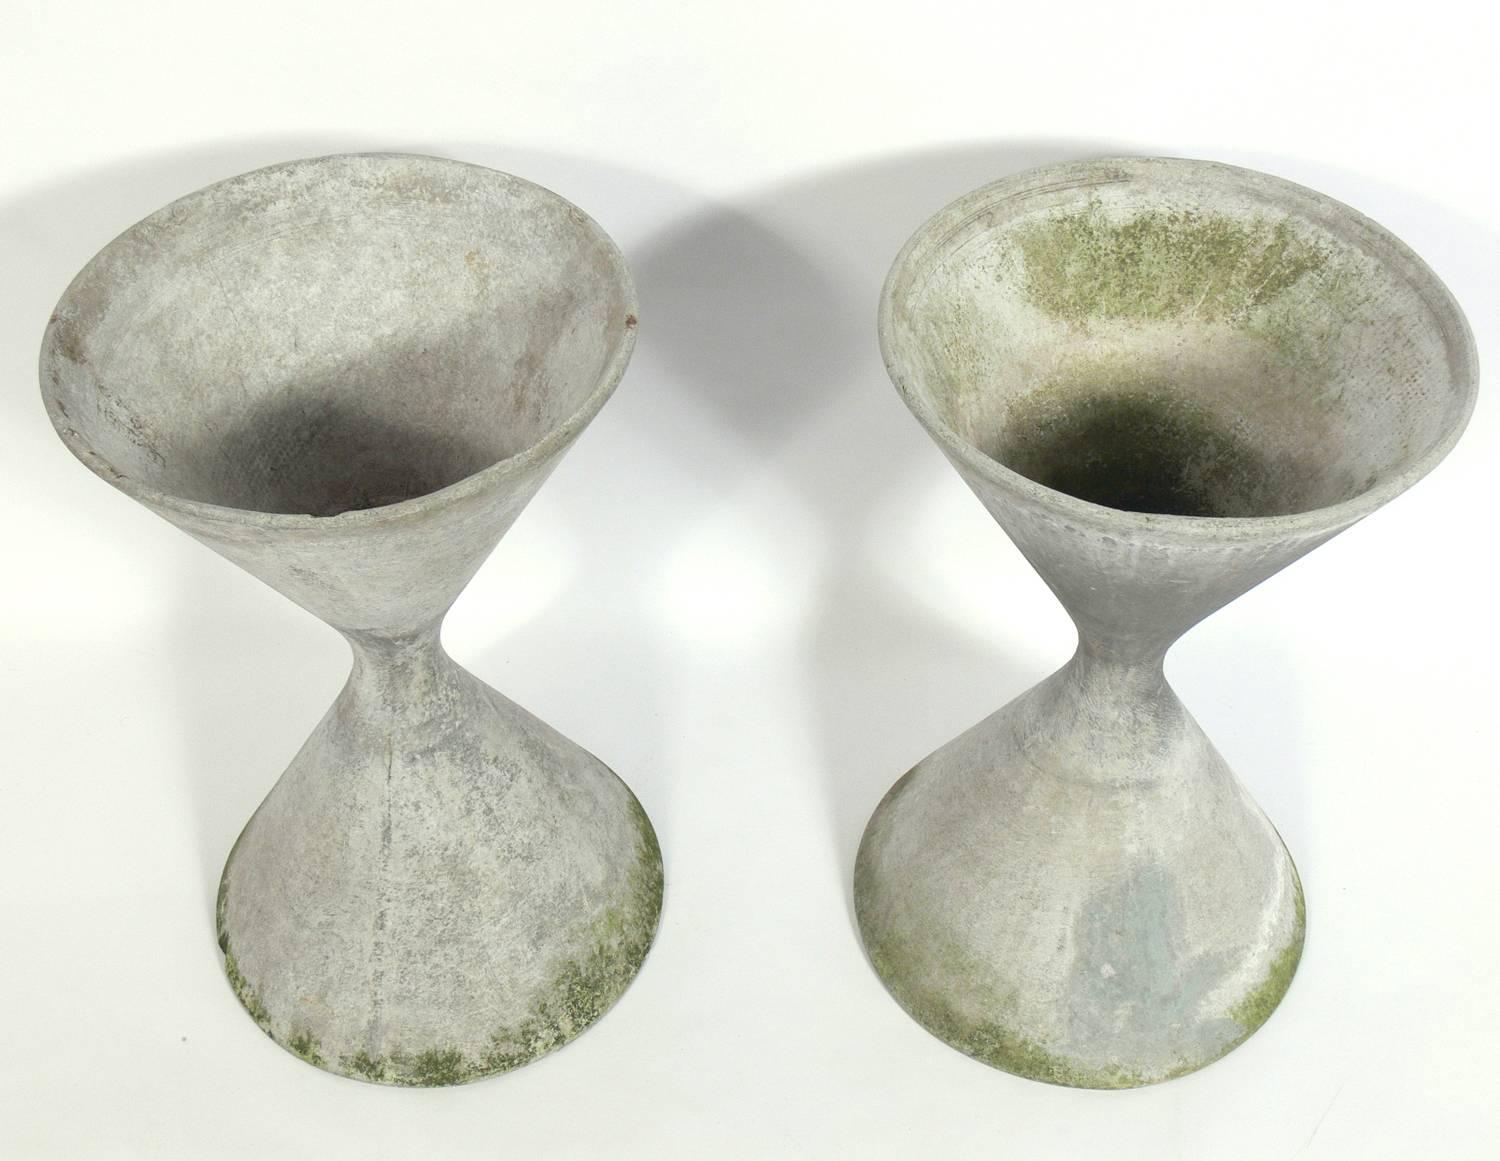 Pair of sculptural planters, designed by Willy Guhl for Eternit AG, Switzerland, circa 1960s. Signed with impressed Eternit mark. They retain their wonderful original patina. The price noted below is for the pair of planters.